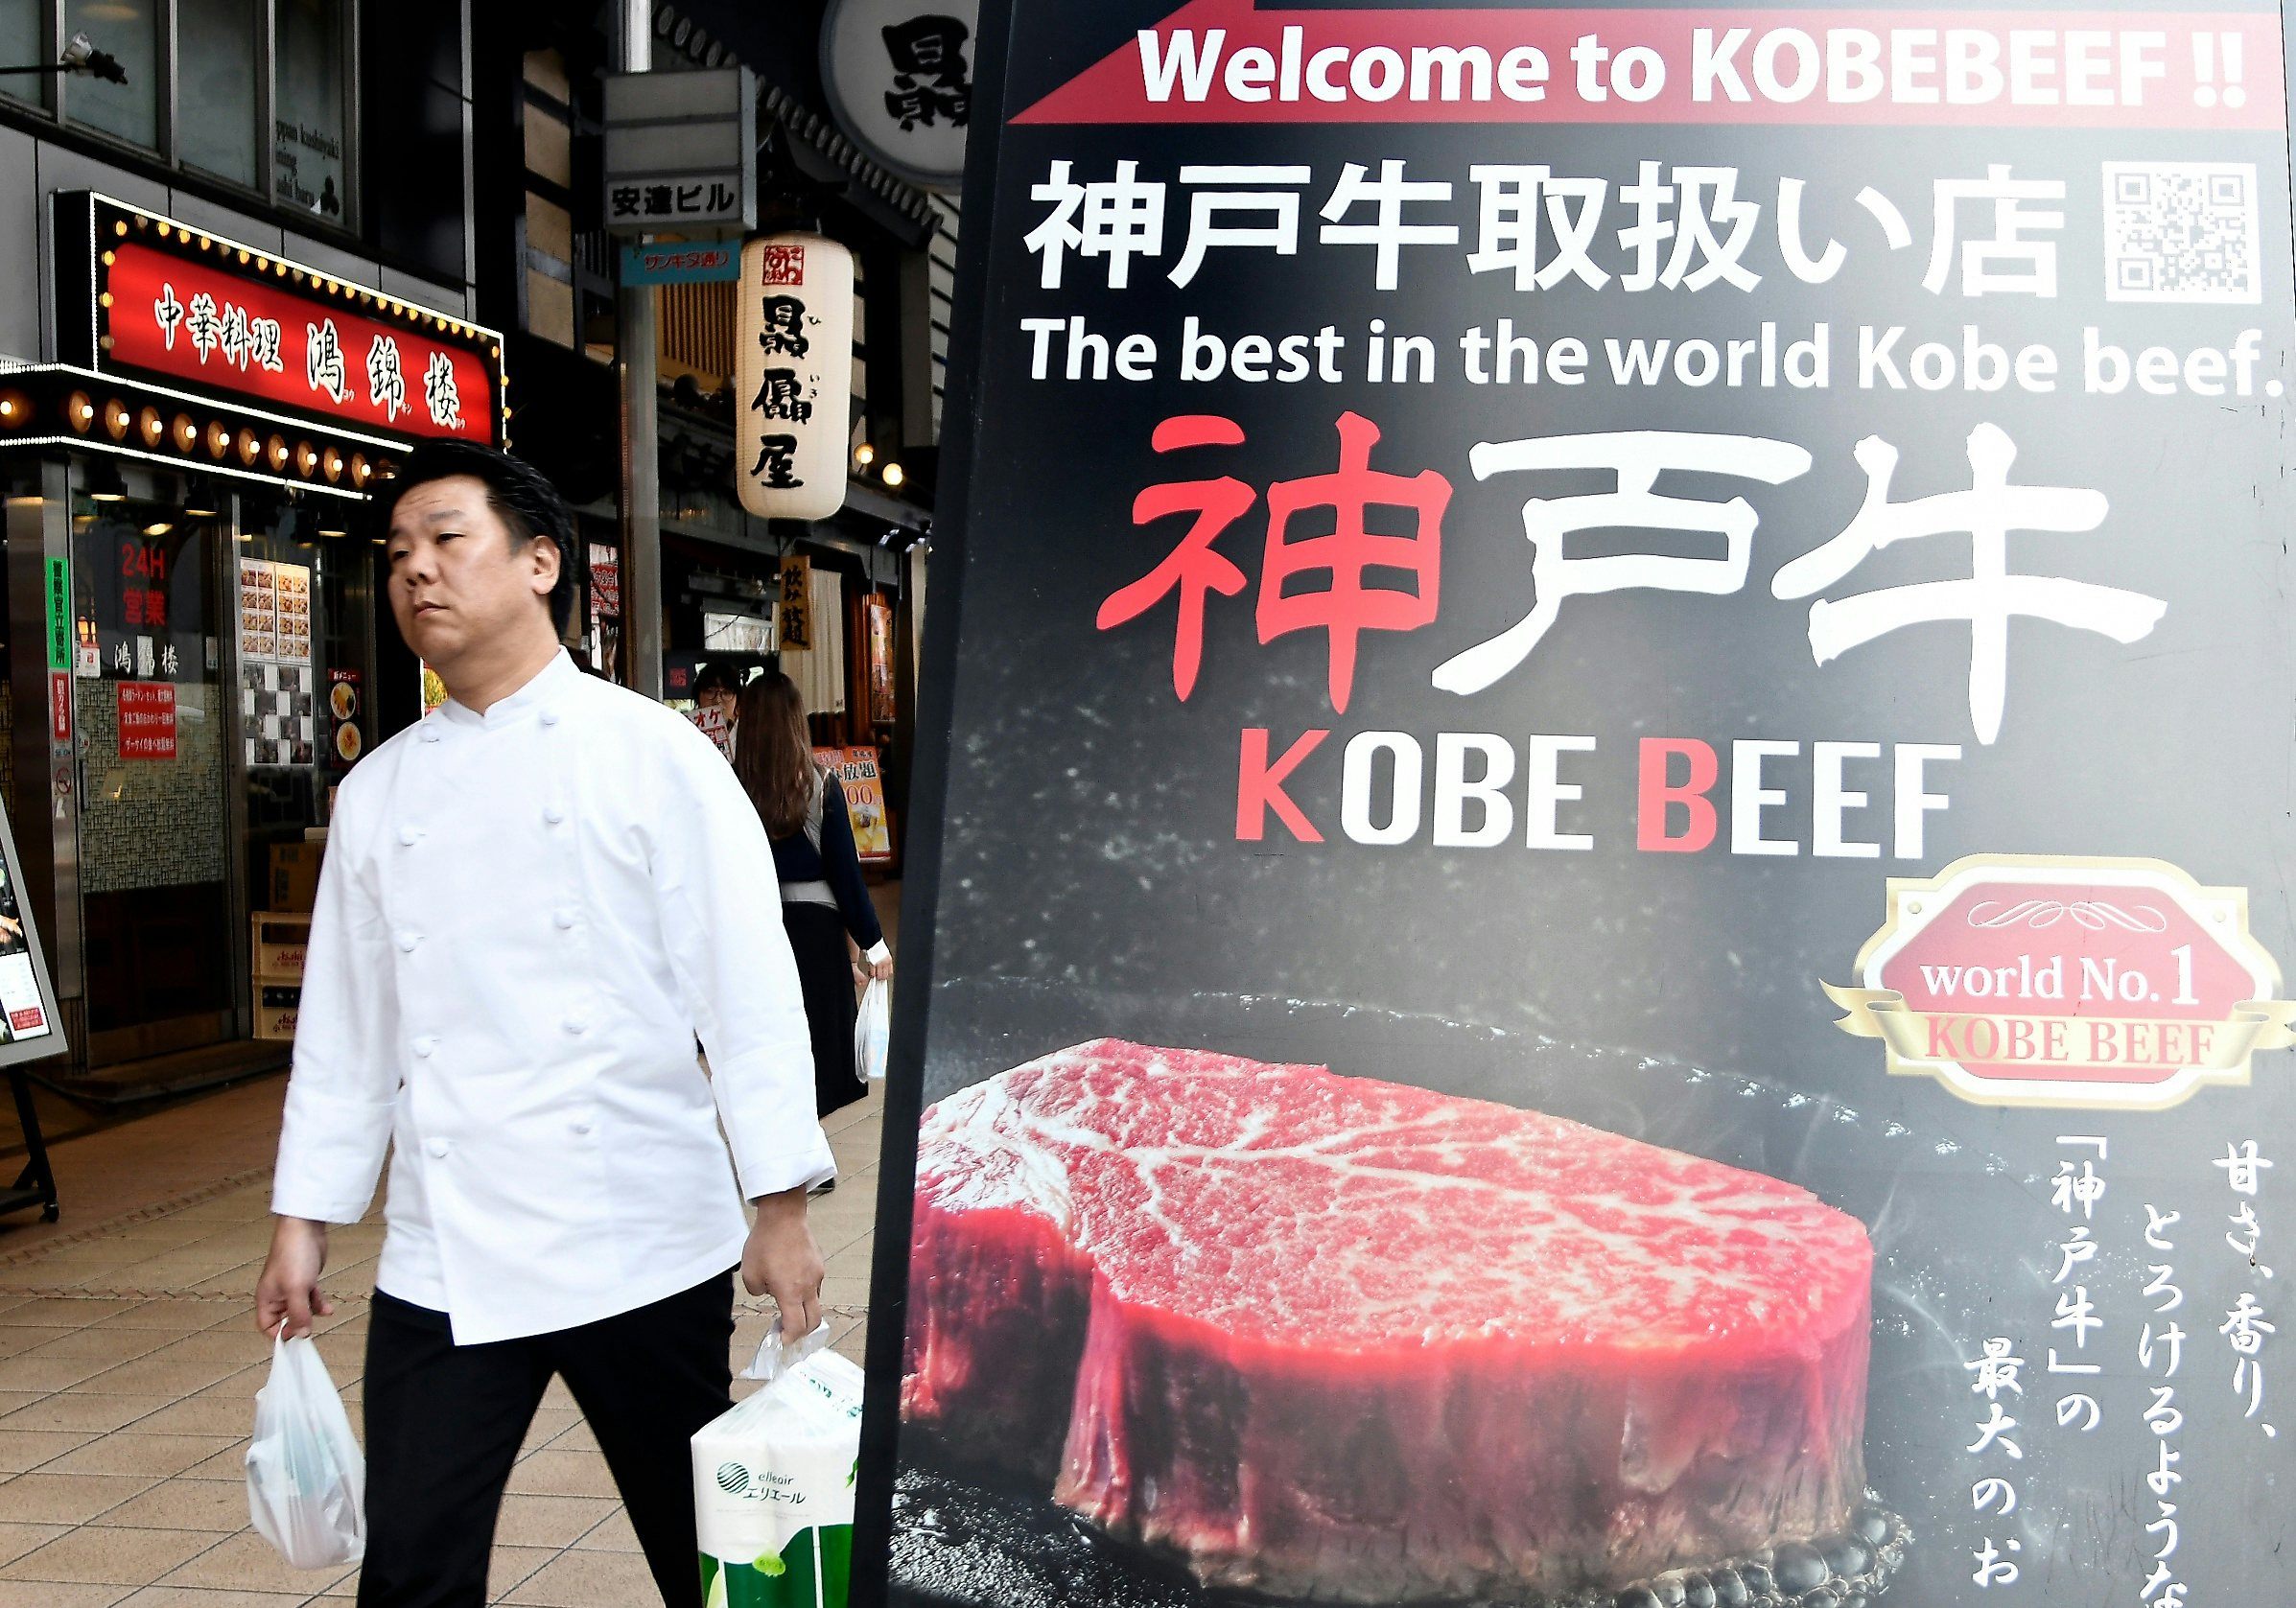 A man walk past a poster advertising Kobe beef in the center of Kobe on September 23, 2019. Photo: Ghetty Images